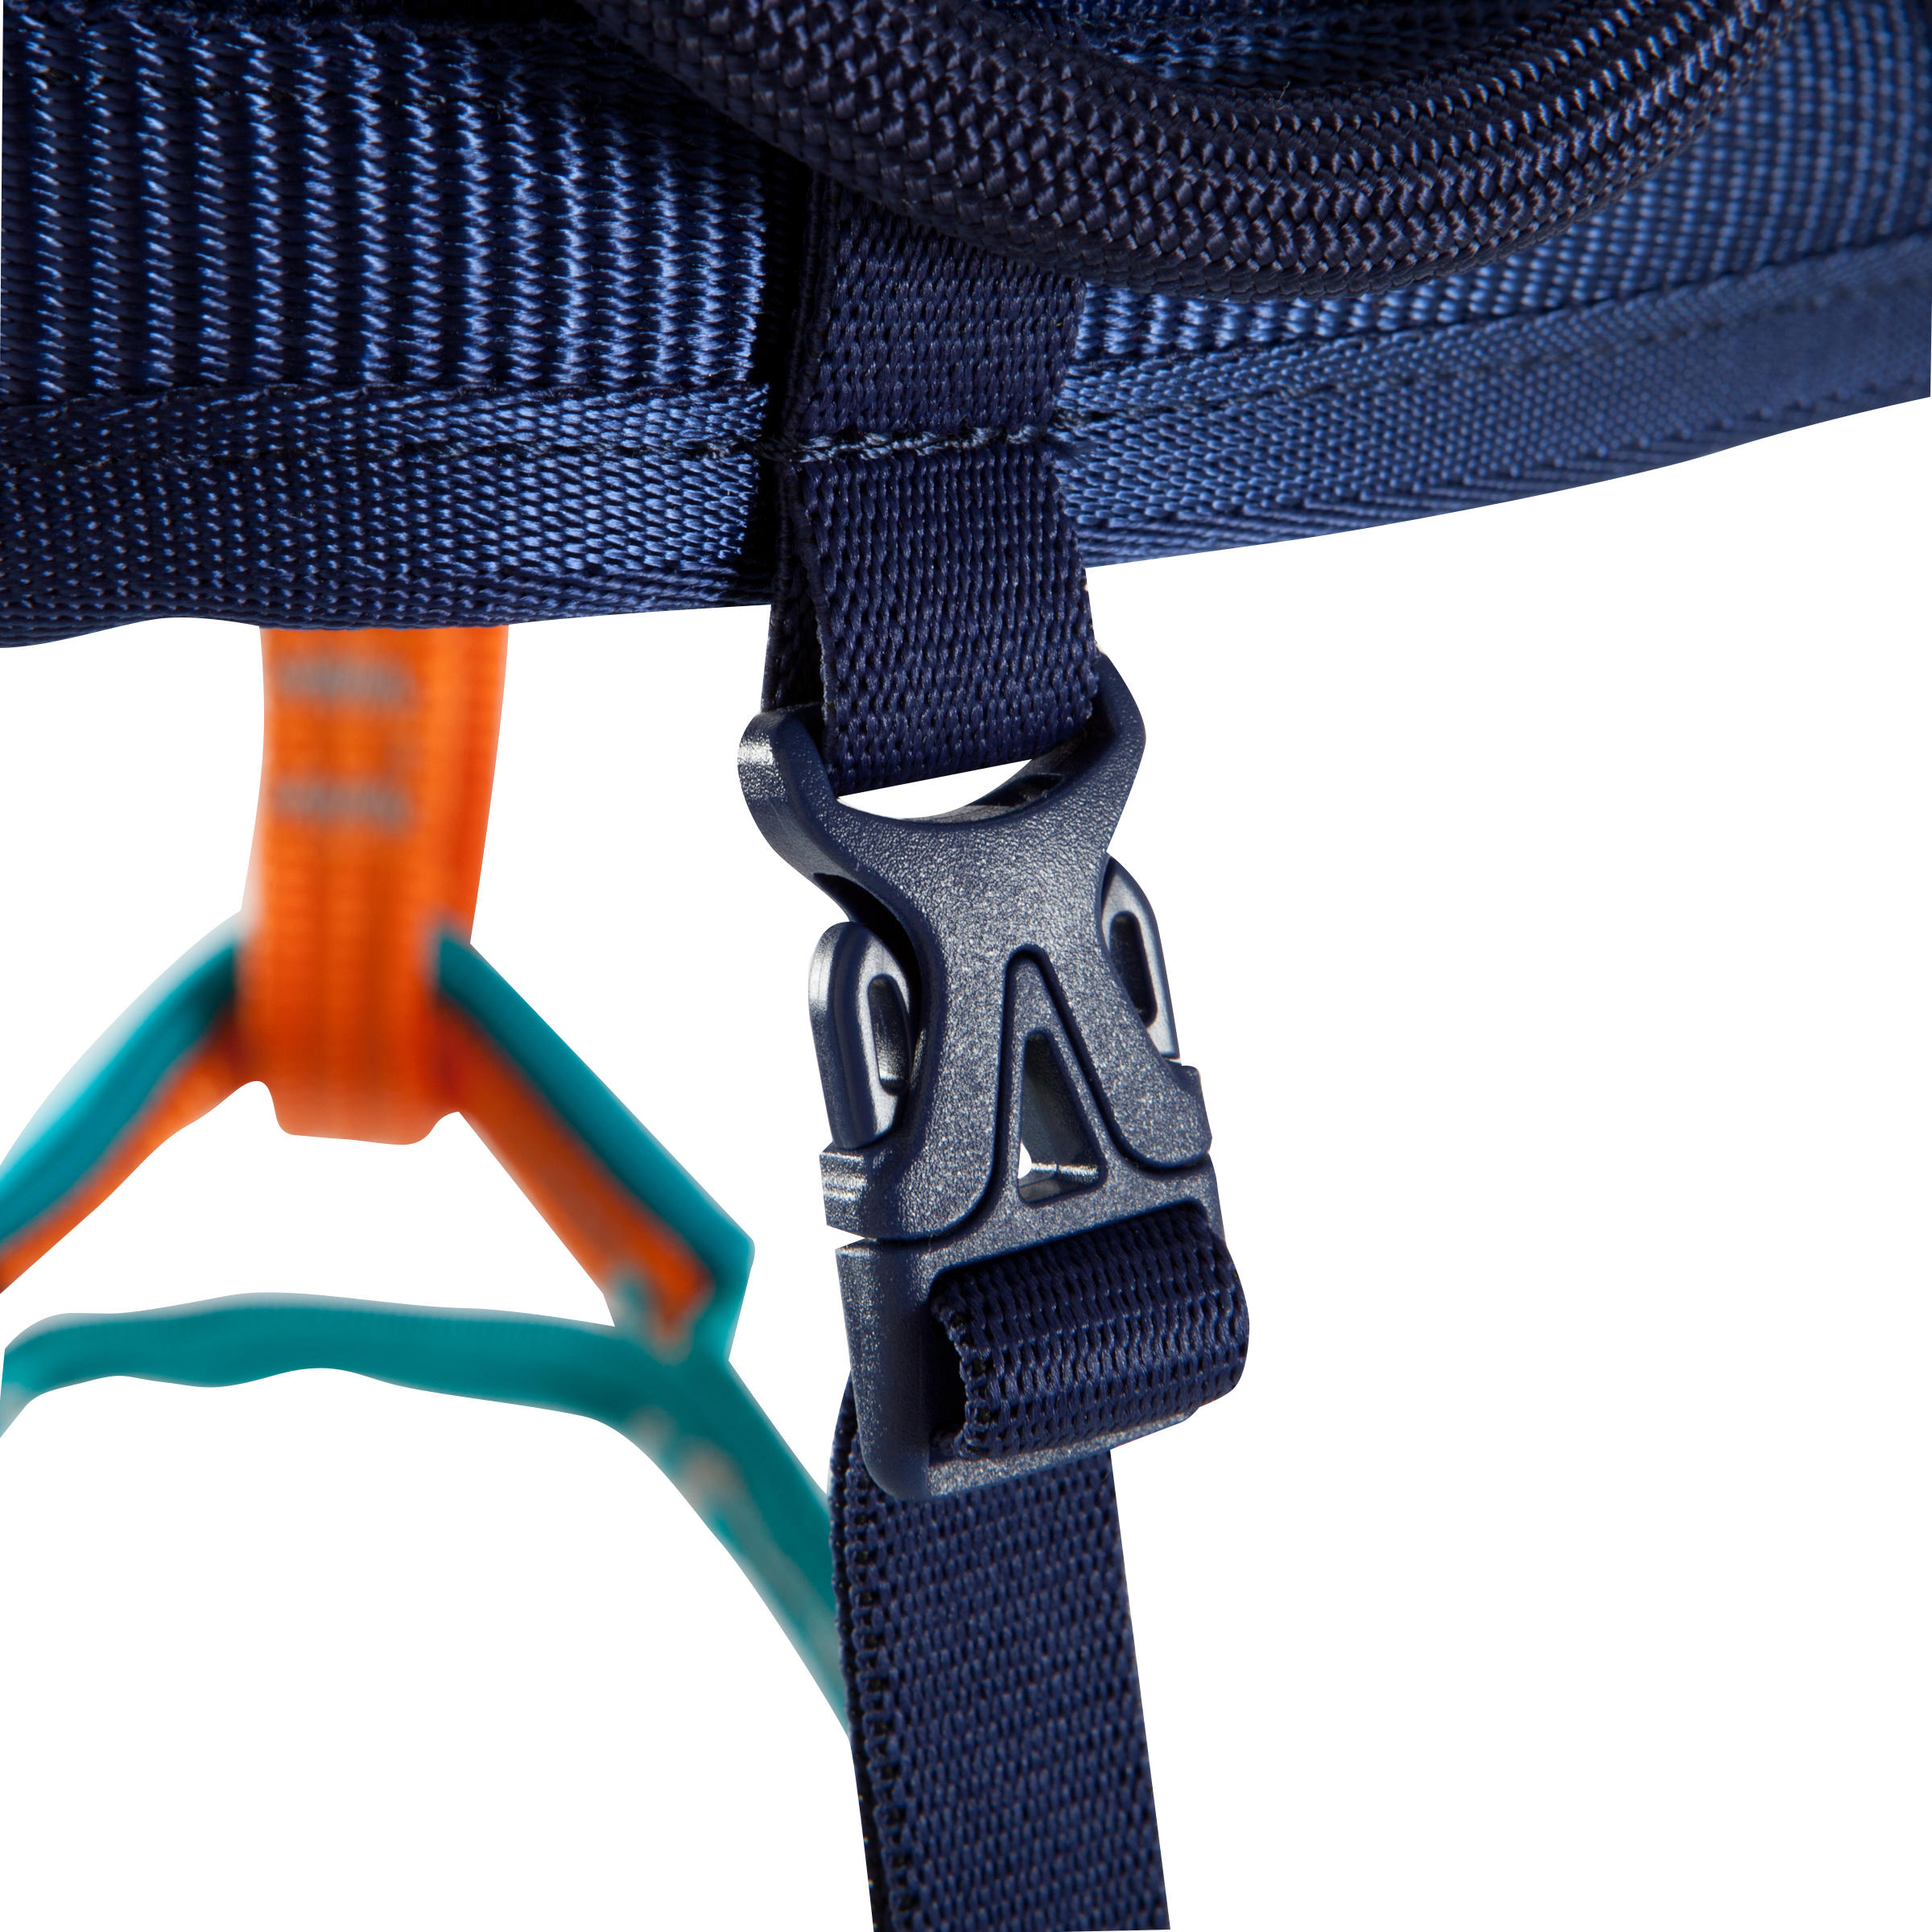 ROCK CLIMBING AND MOUNTAINEERING HARNESS - ROCK BLUE 6/9